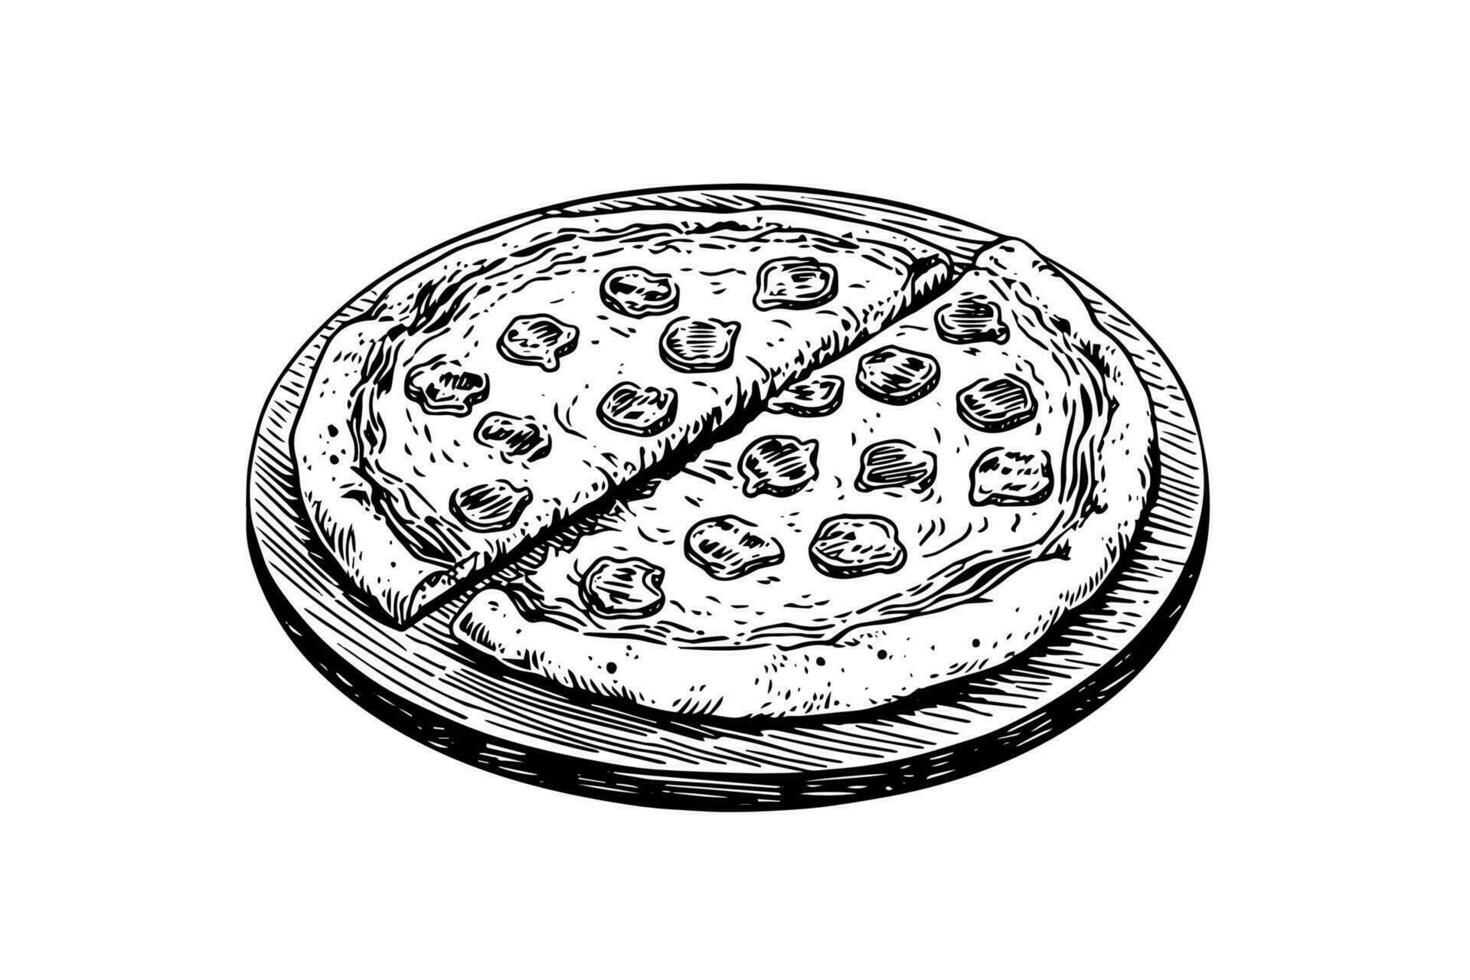 Sliced pizza sketch hand drawn engraving style Vector illustration.